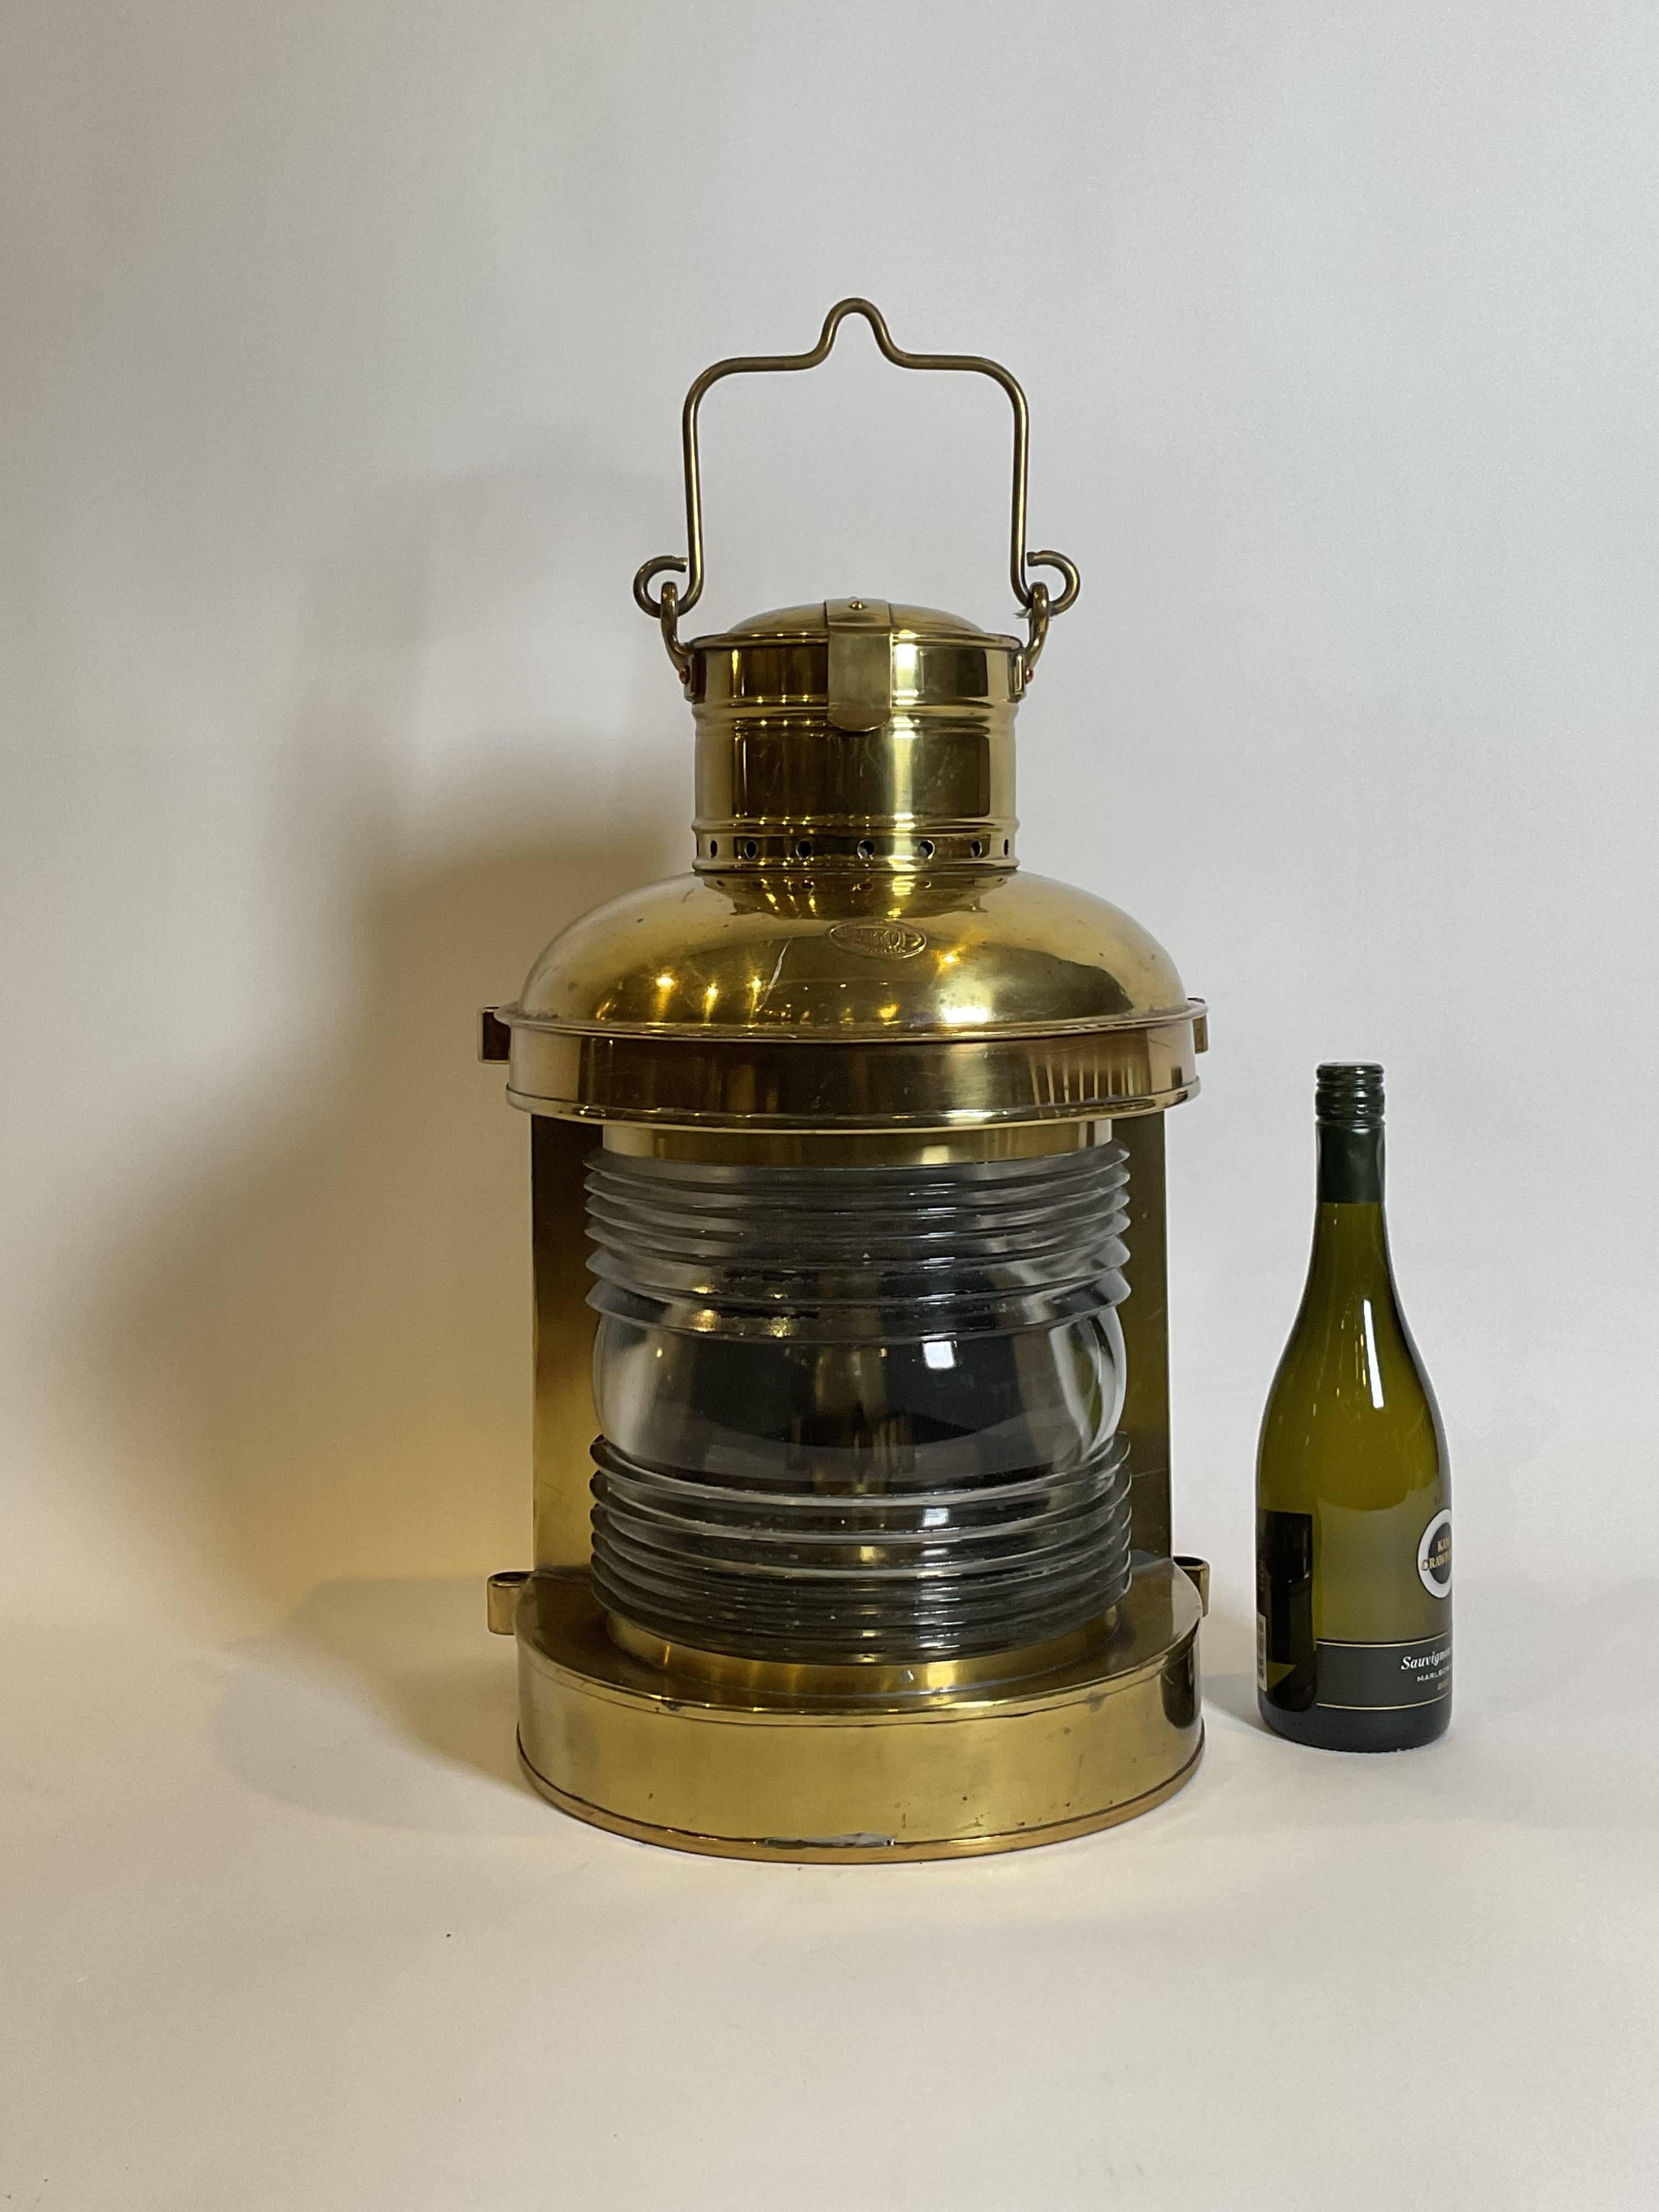 made by Perkins Marine Lamp Corporation of Brooklyn, New York. Fitted with a glass fresnel lens. Old lacquered finish. With original burner and tank.

Weight: 22 lbs.
Overall Dimensions: 20